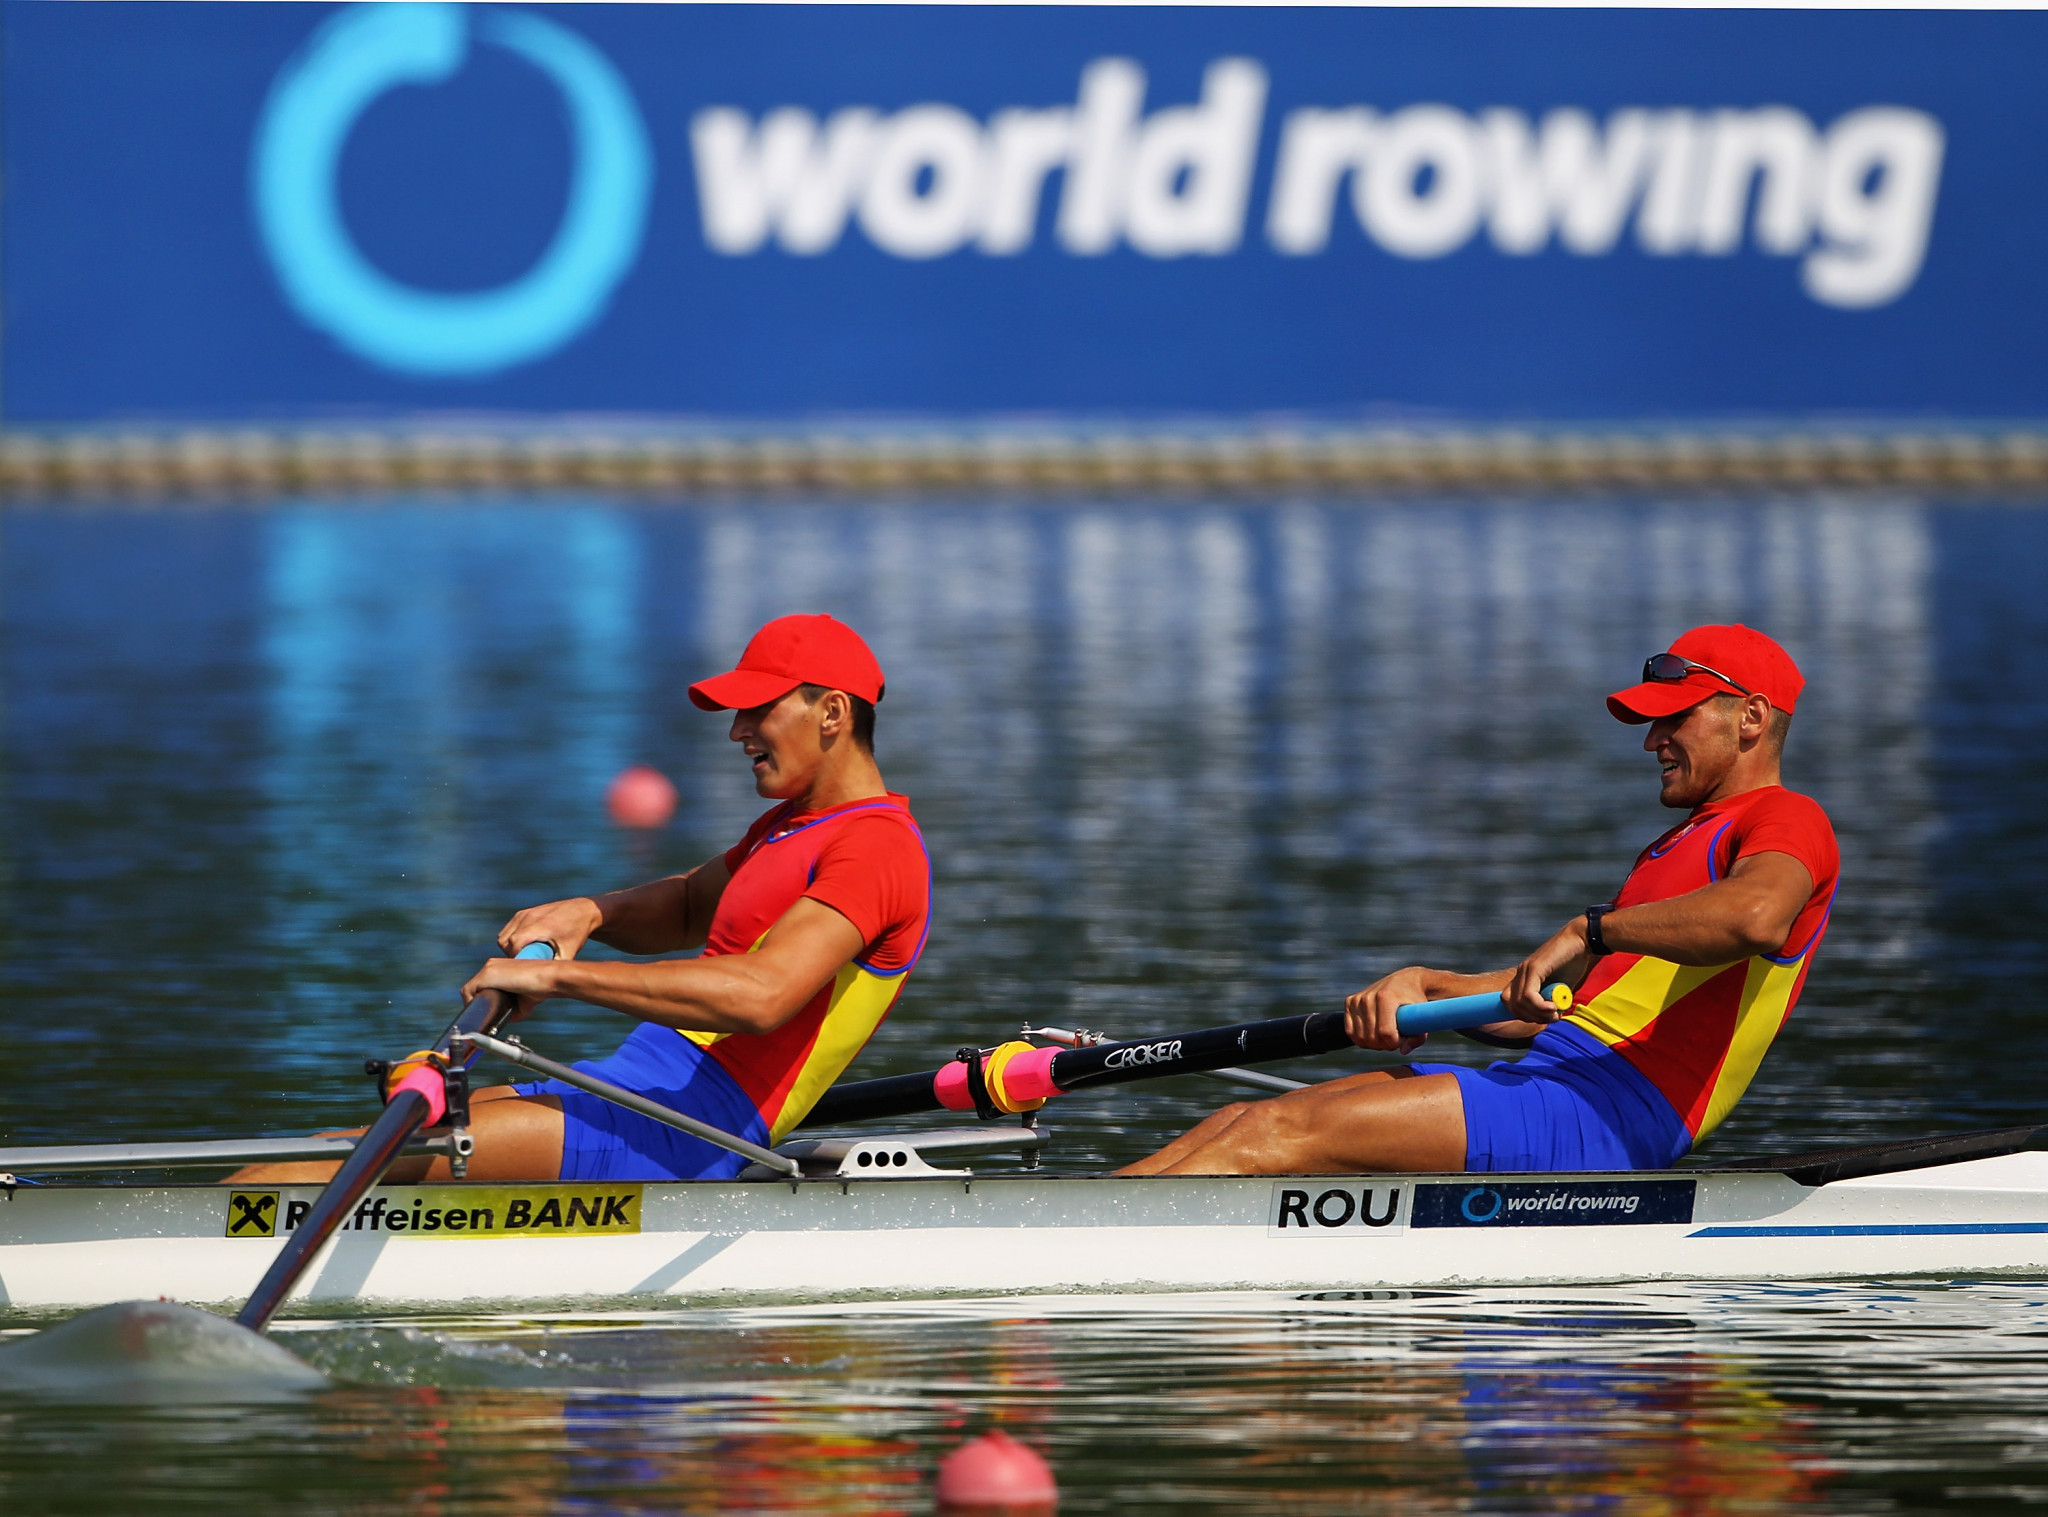 Belgrade, Poznan and Trakai in contention to host 2023 World Rowing